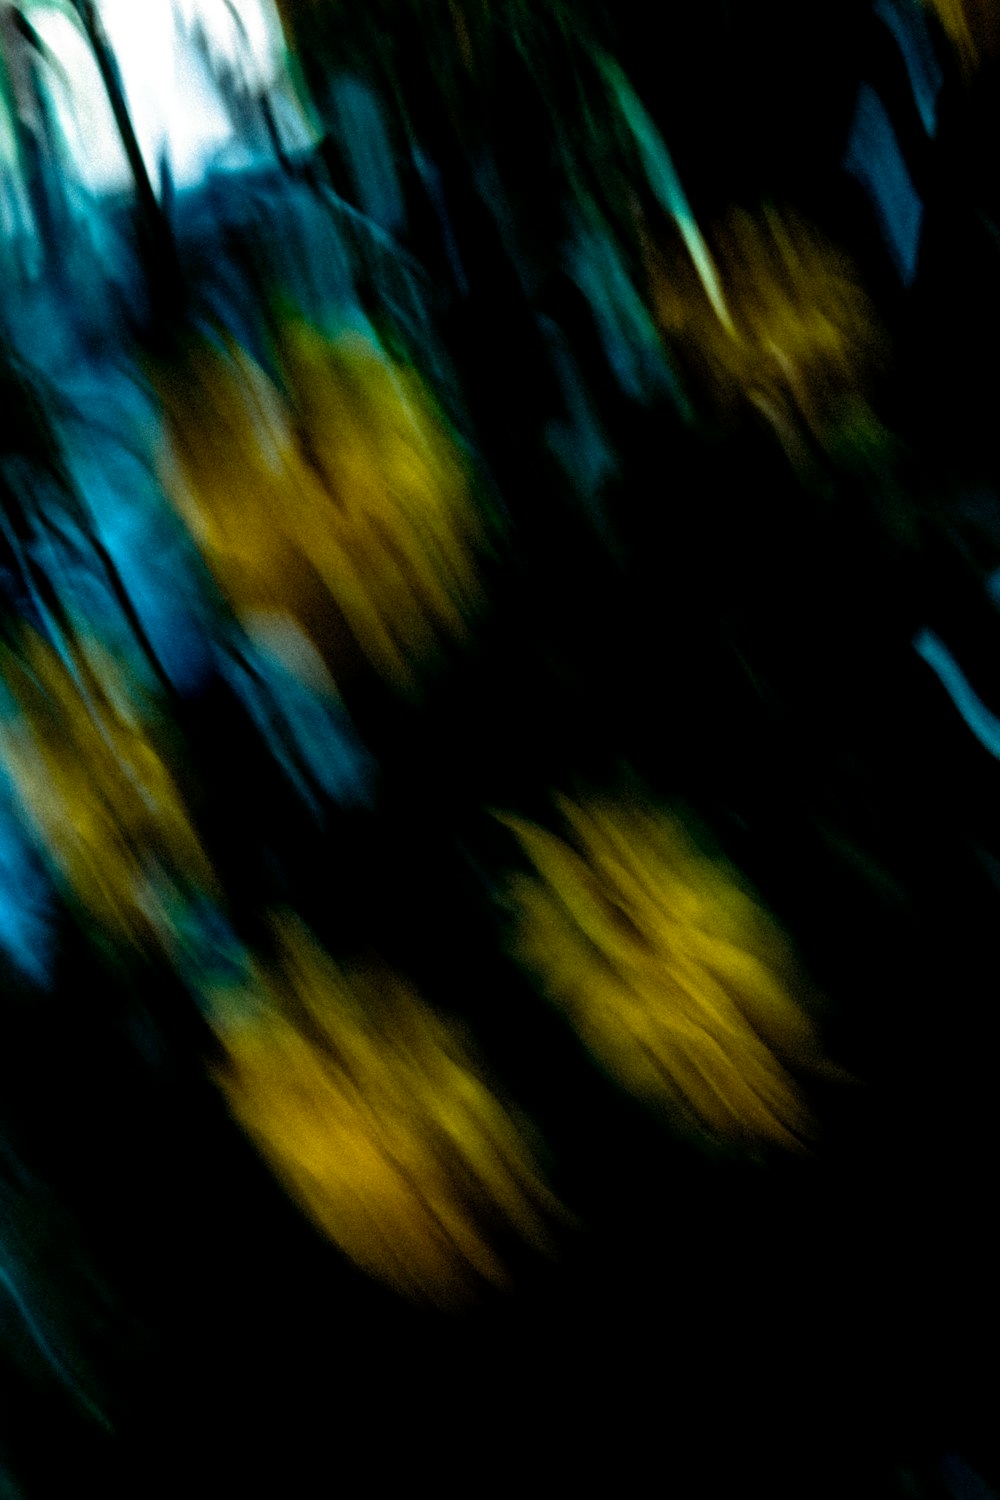 a blurry photo of trees with yellow leaves